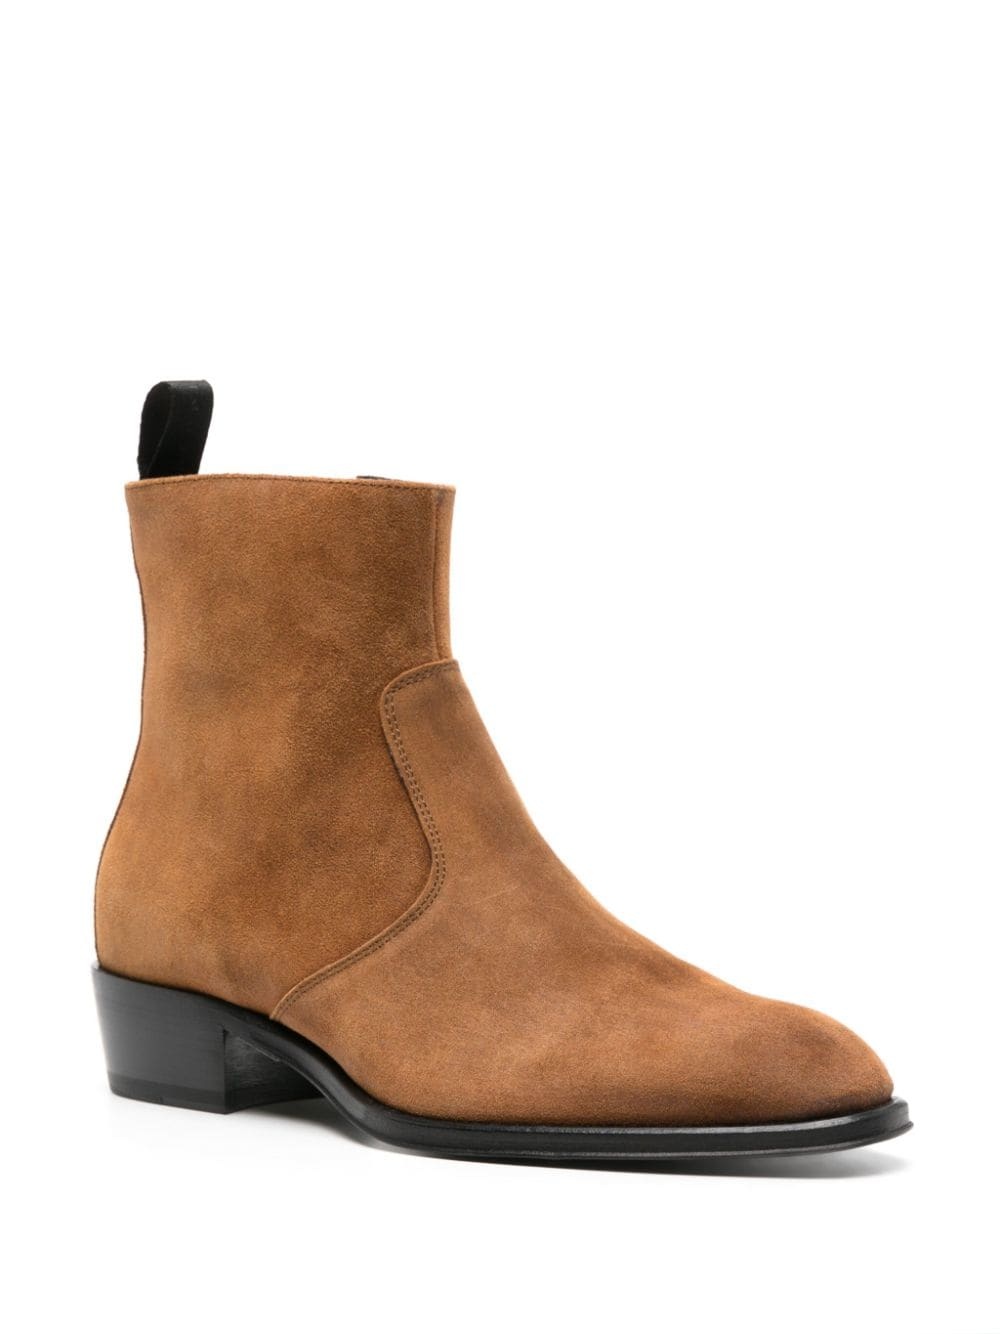 40mm suede ankle boots - 2